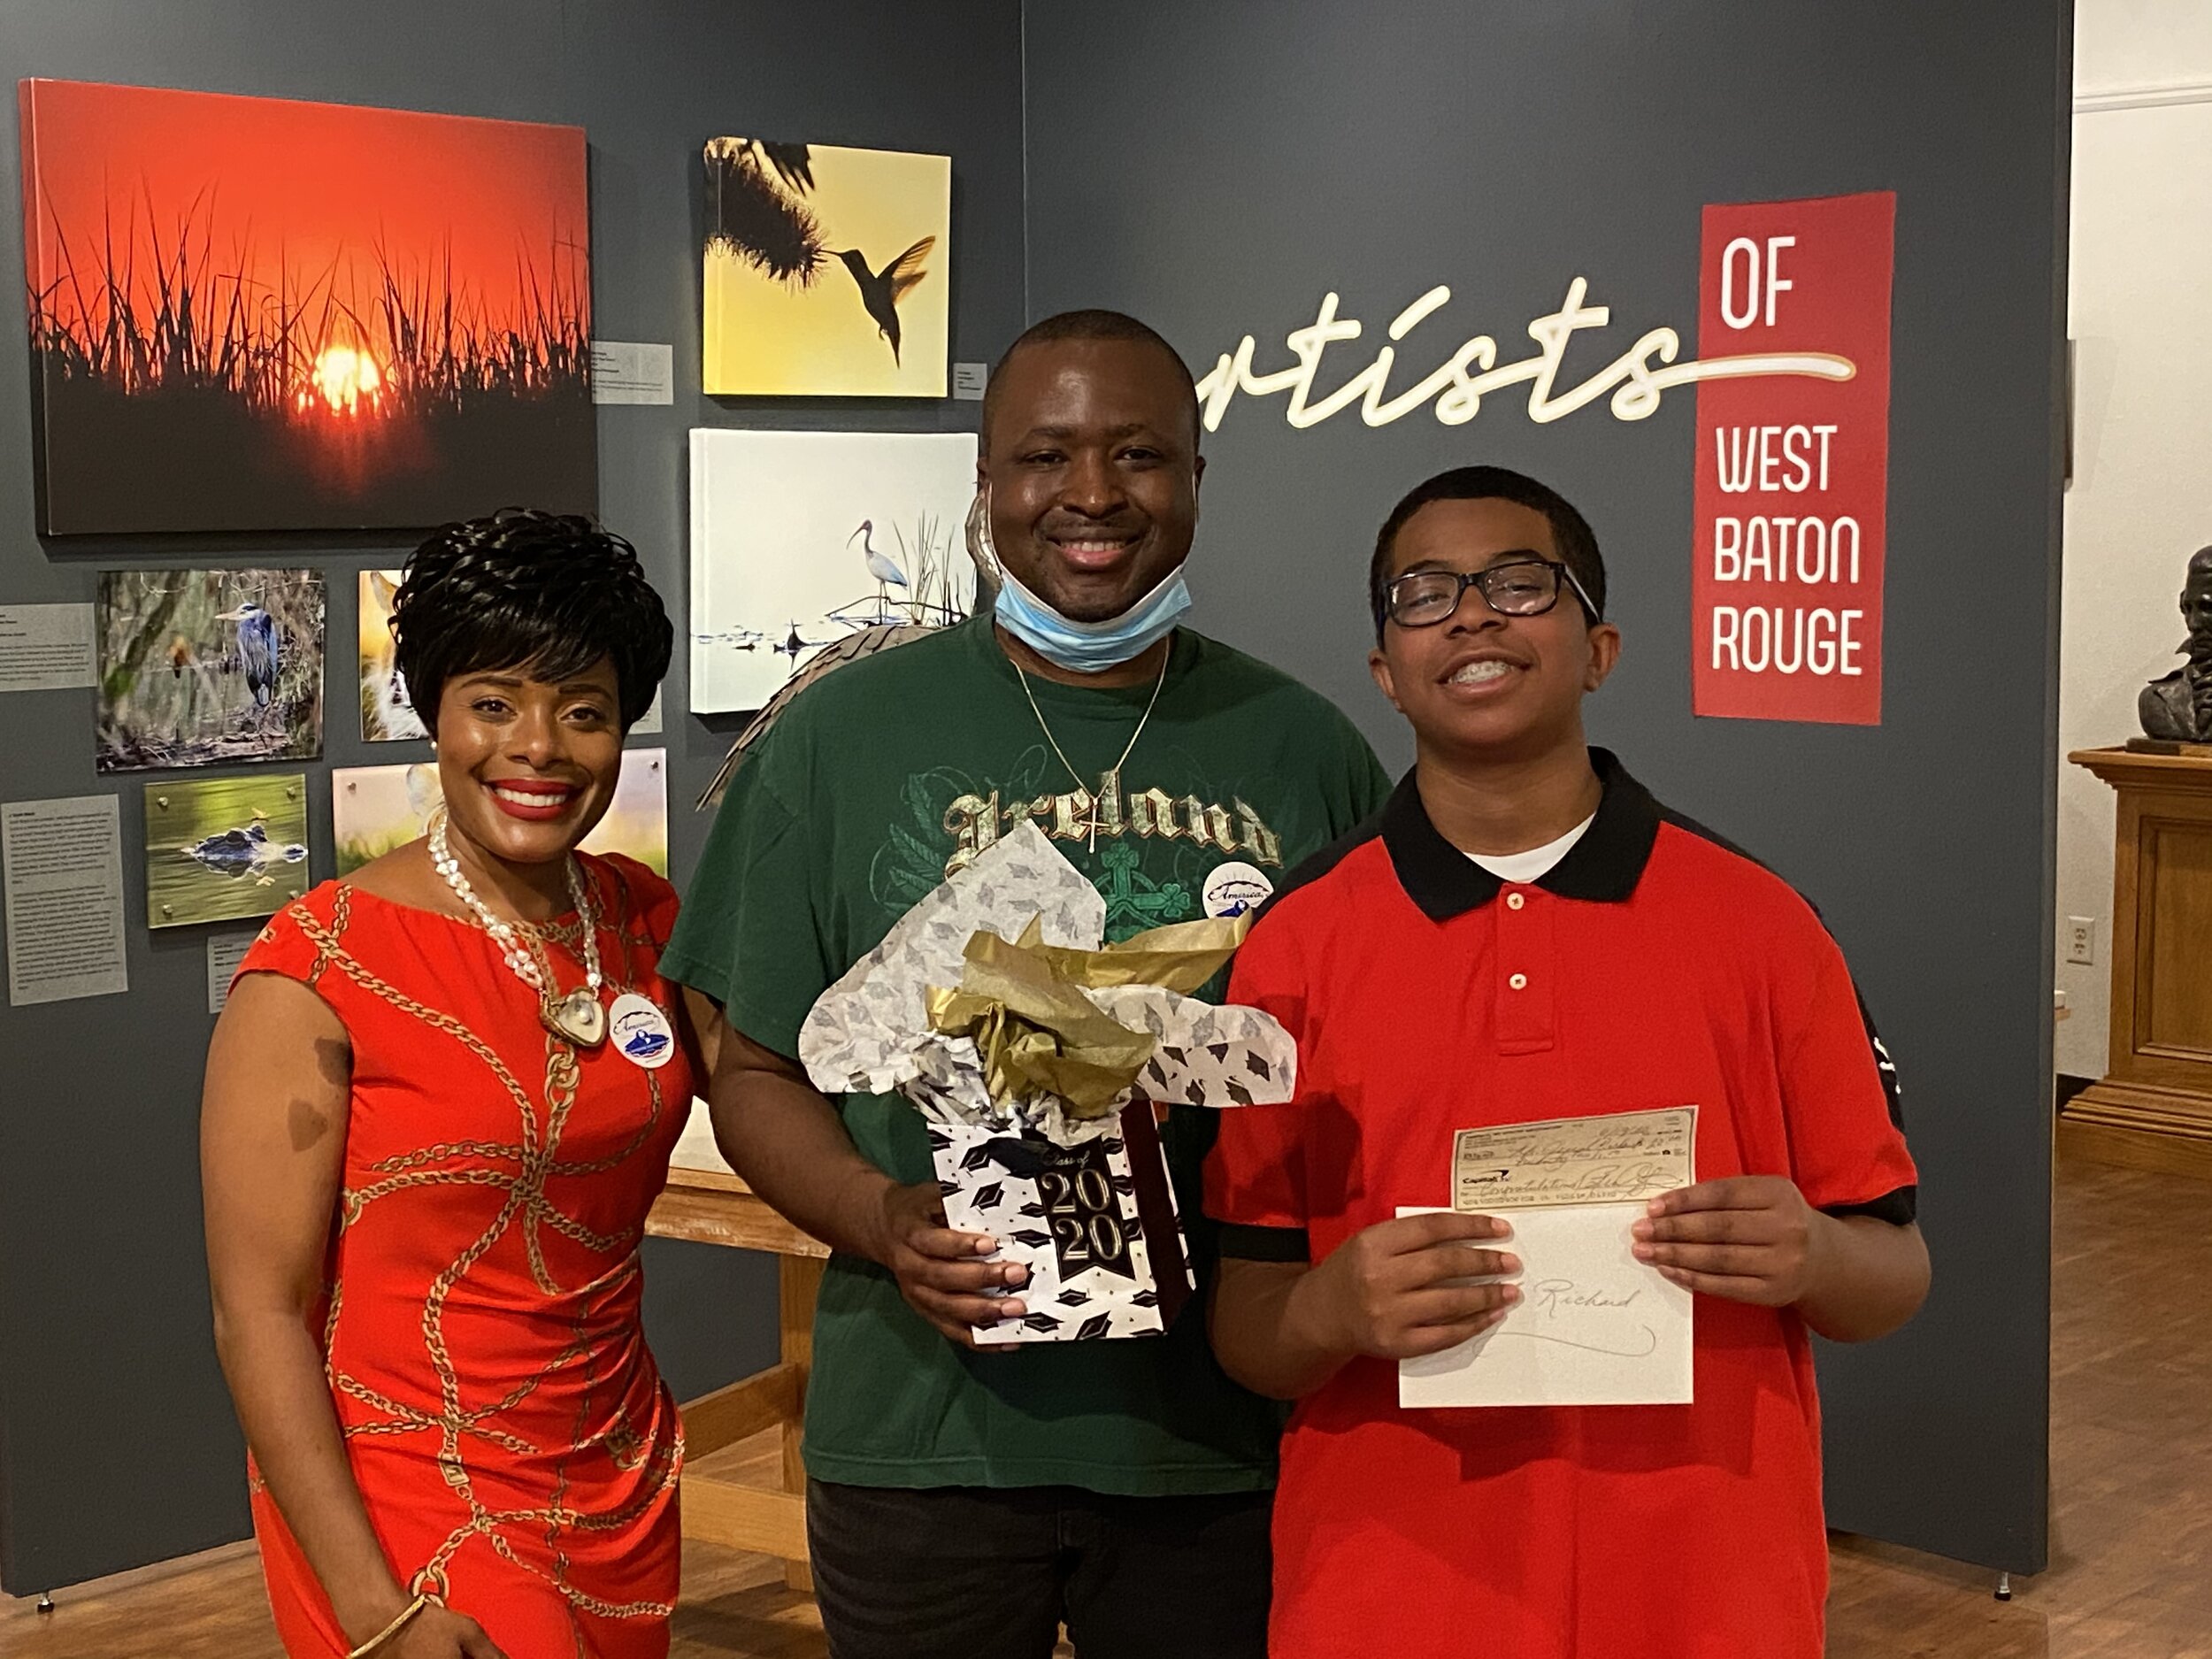 On Juneteenth, AMOA Saluted Mr. Joseph R. of Sherwood Middle School at the West Baton Rouge Museum!